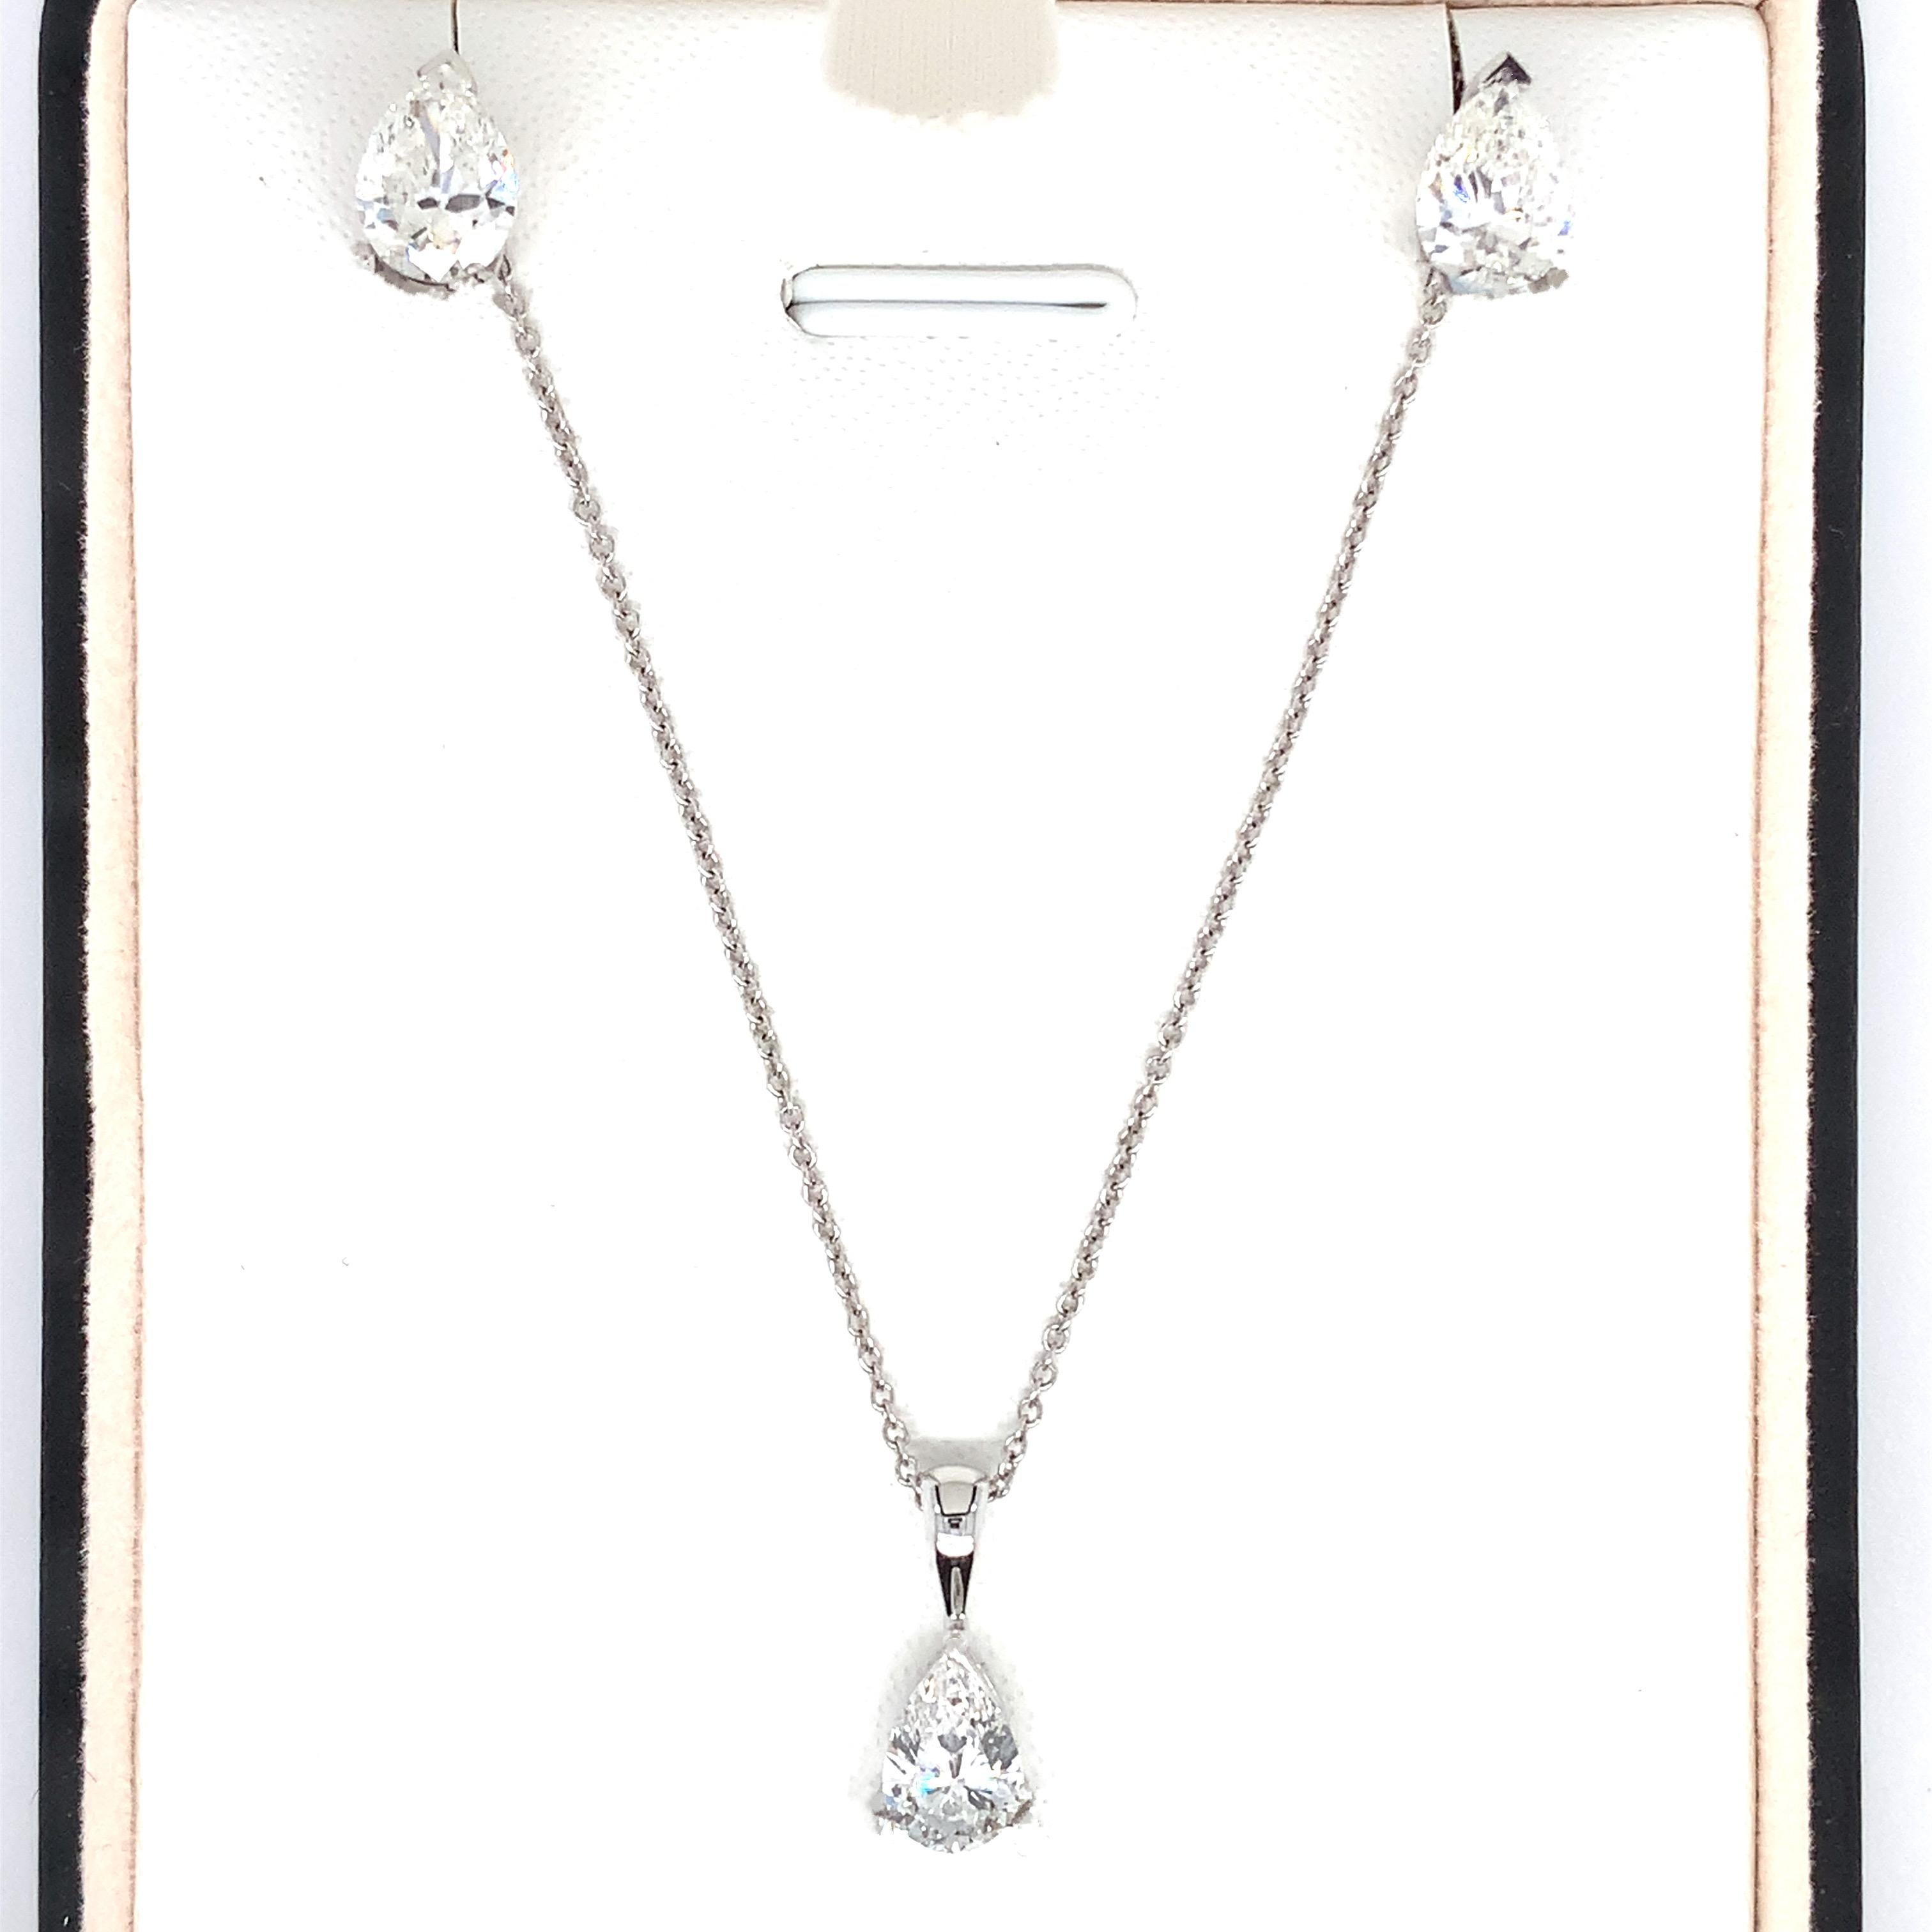 Pear diamond solitaire drop pendant and stud earrings jewellery set 18K gold
Gorgeous pear cut diamond jewellery set composed of solitaire pear shaped diamonds two matching earrings and drop pendant necklace all in 18k white gold.
Pear shaped